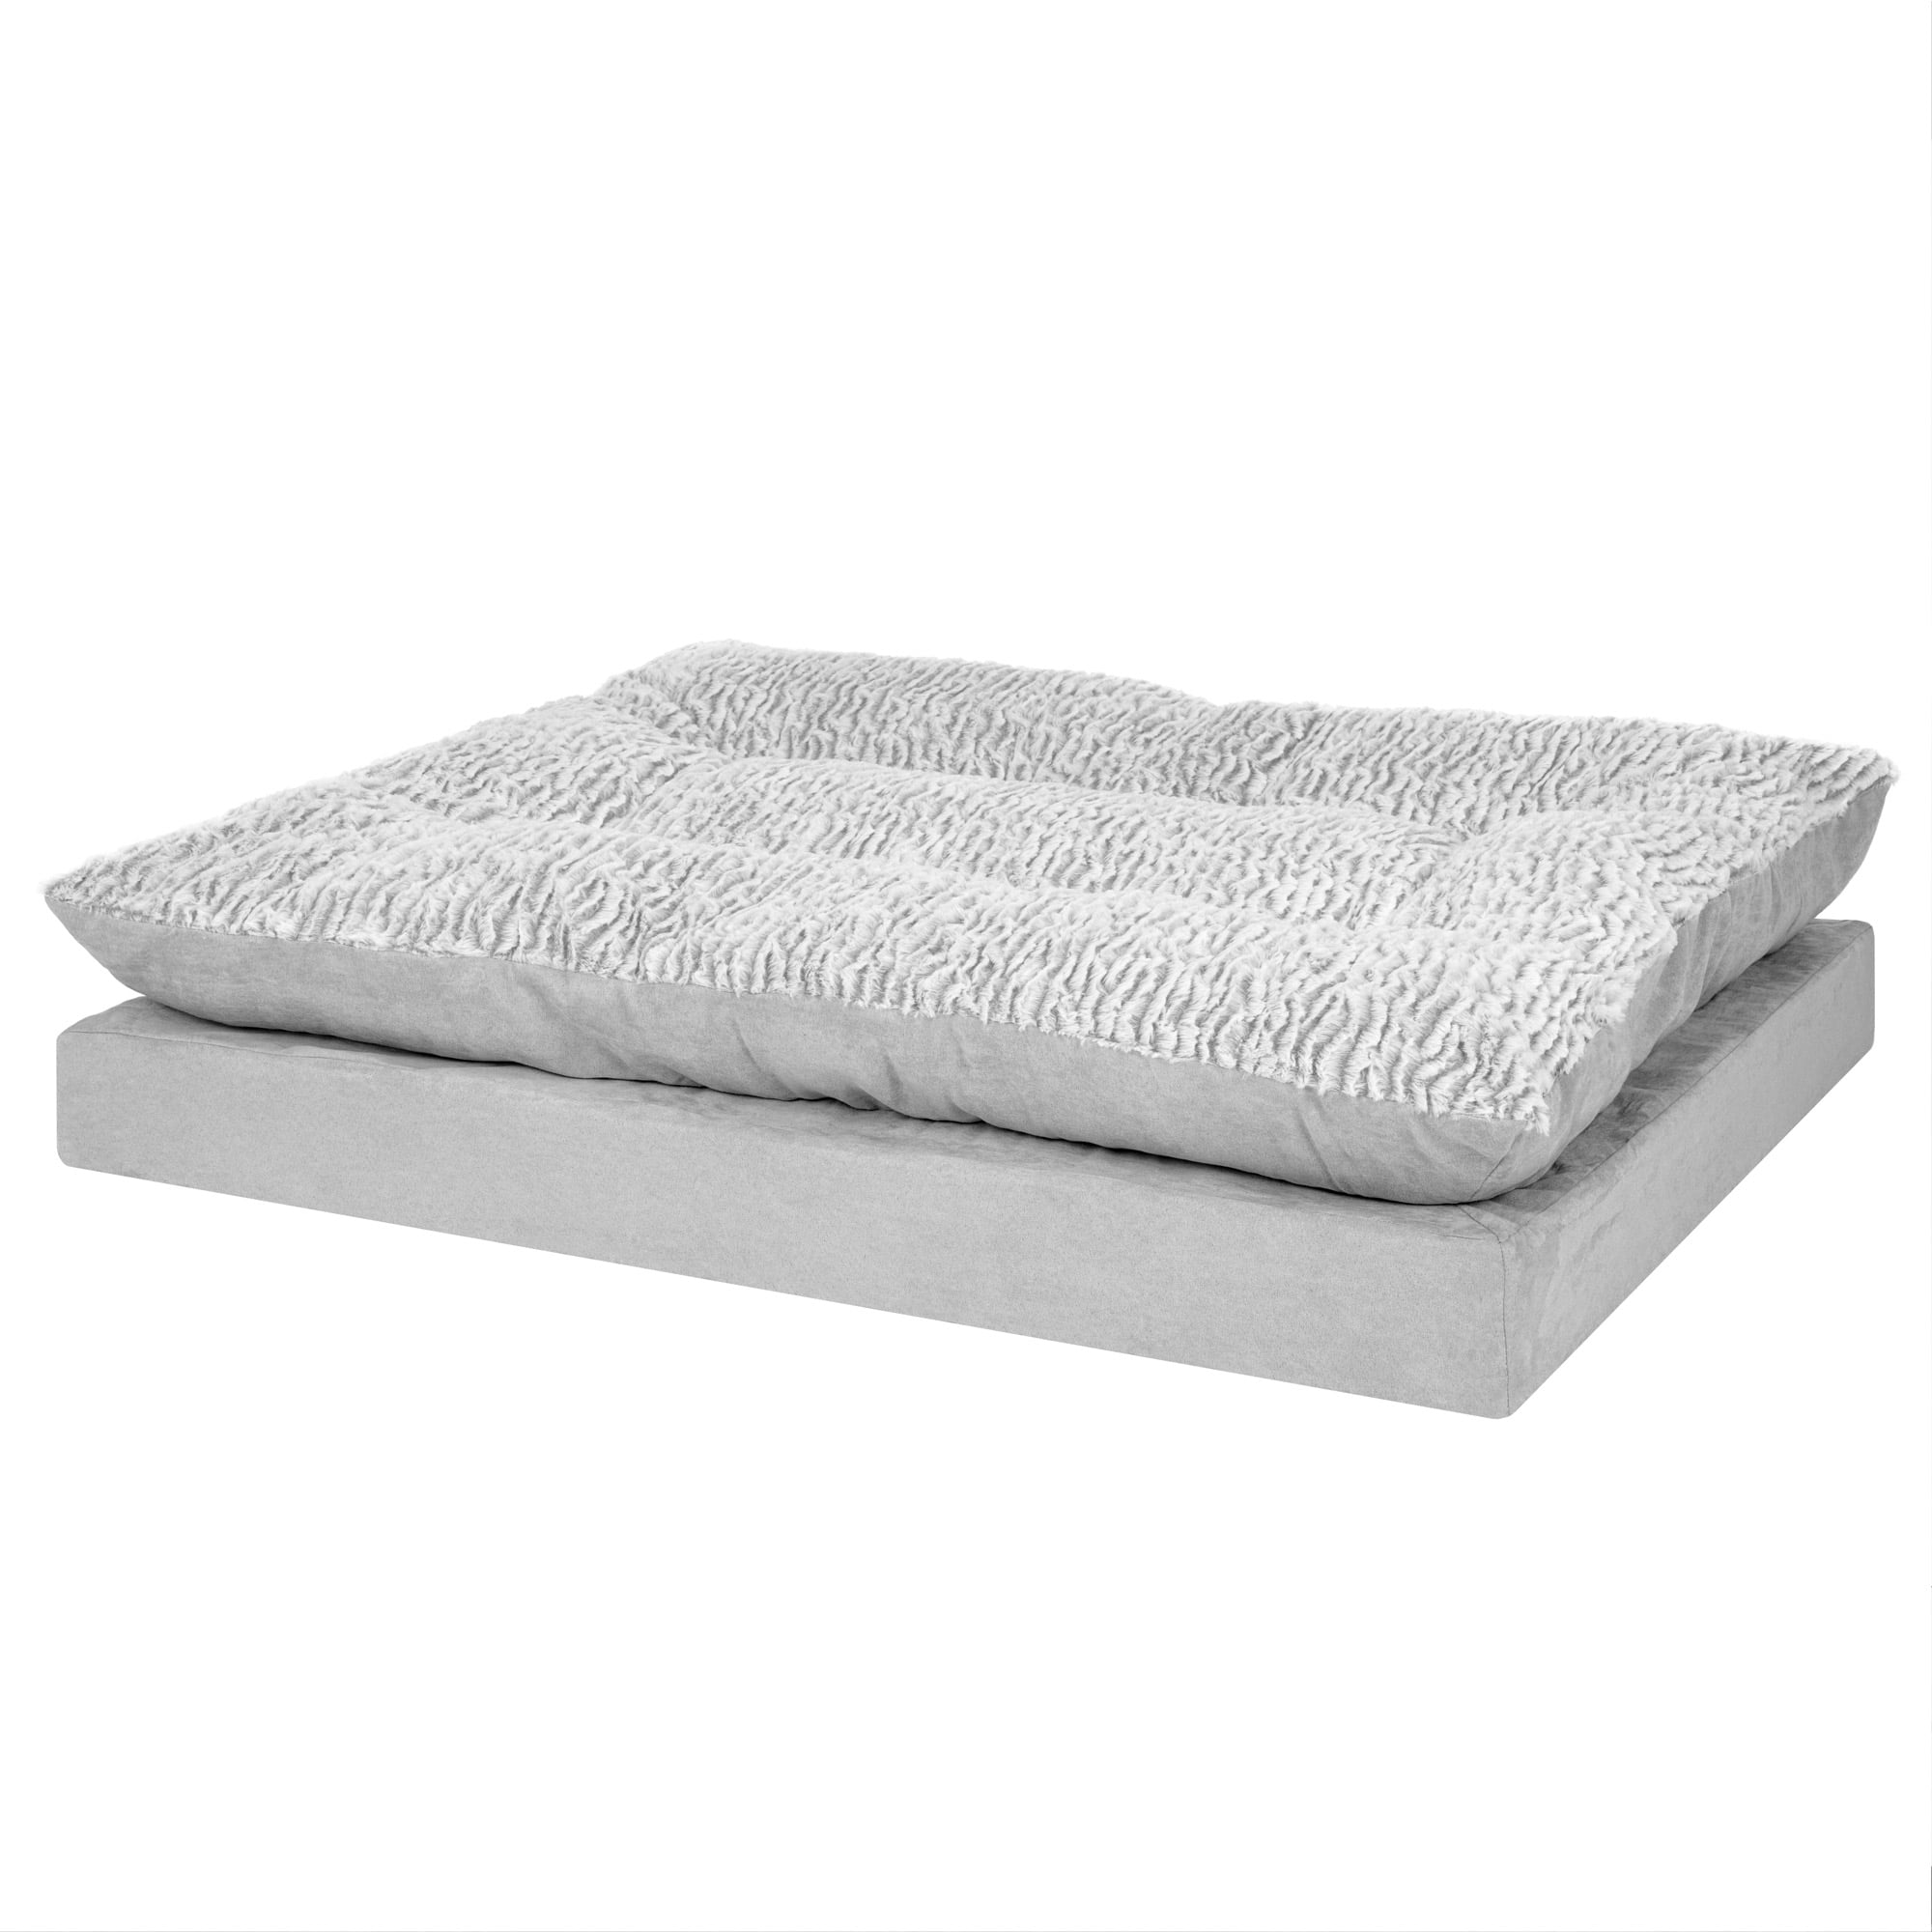 FurHaven Pet Products Embossed Faux Fur & Suede Orthopedic Pillow